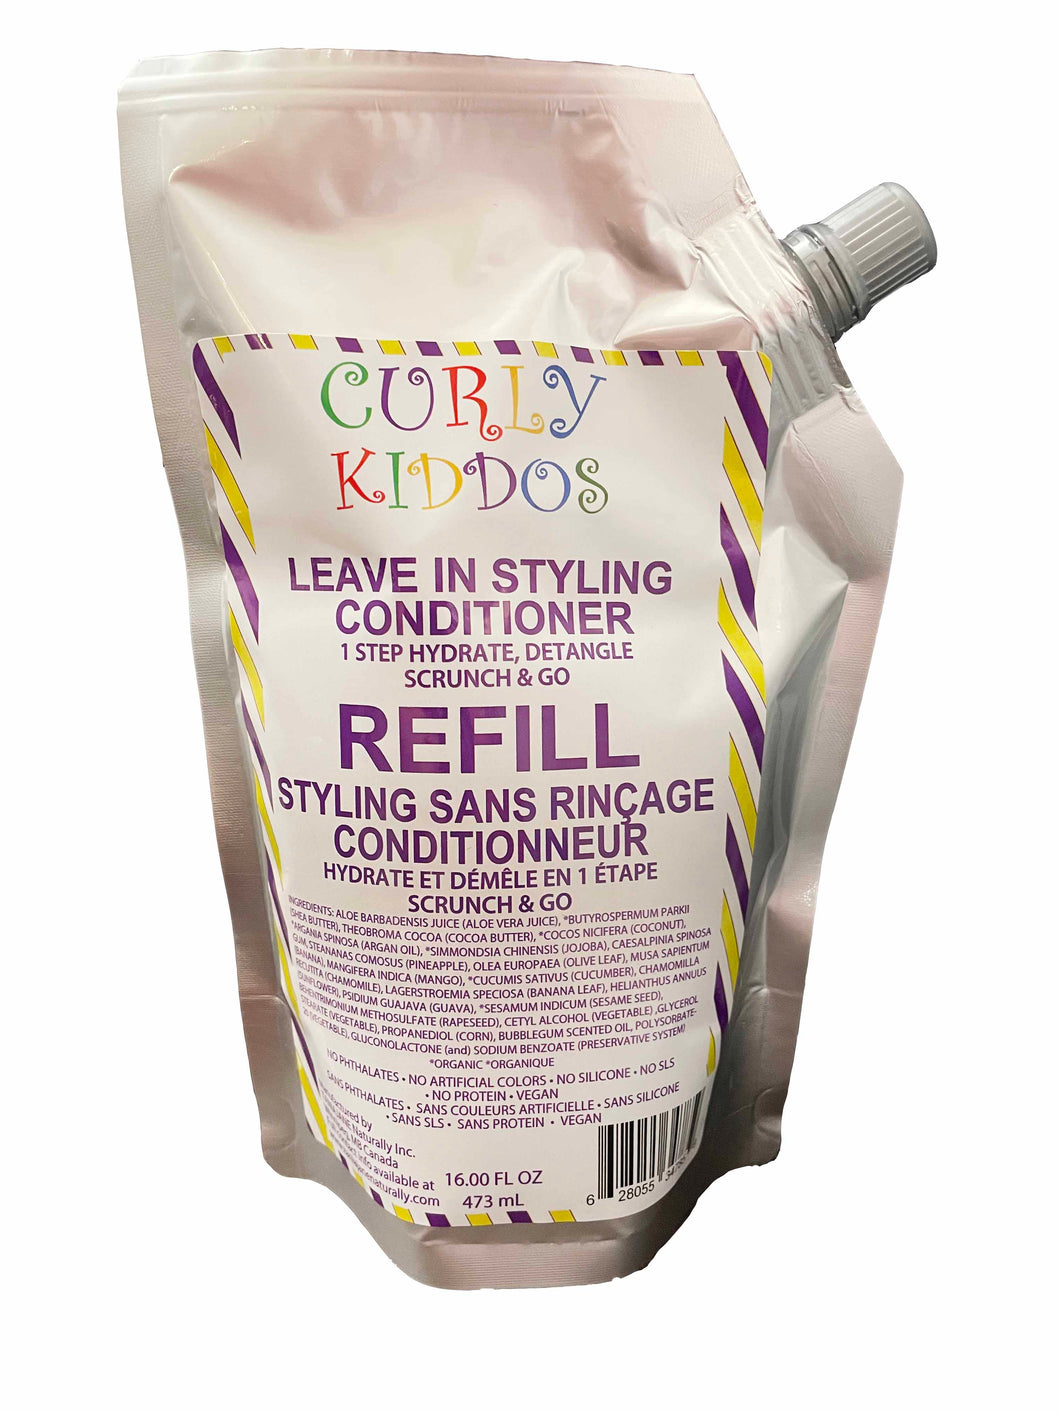 REFILL - Curly Kiddos Leave In Styling Conditioner